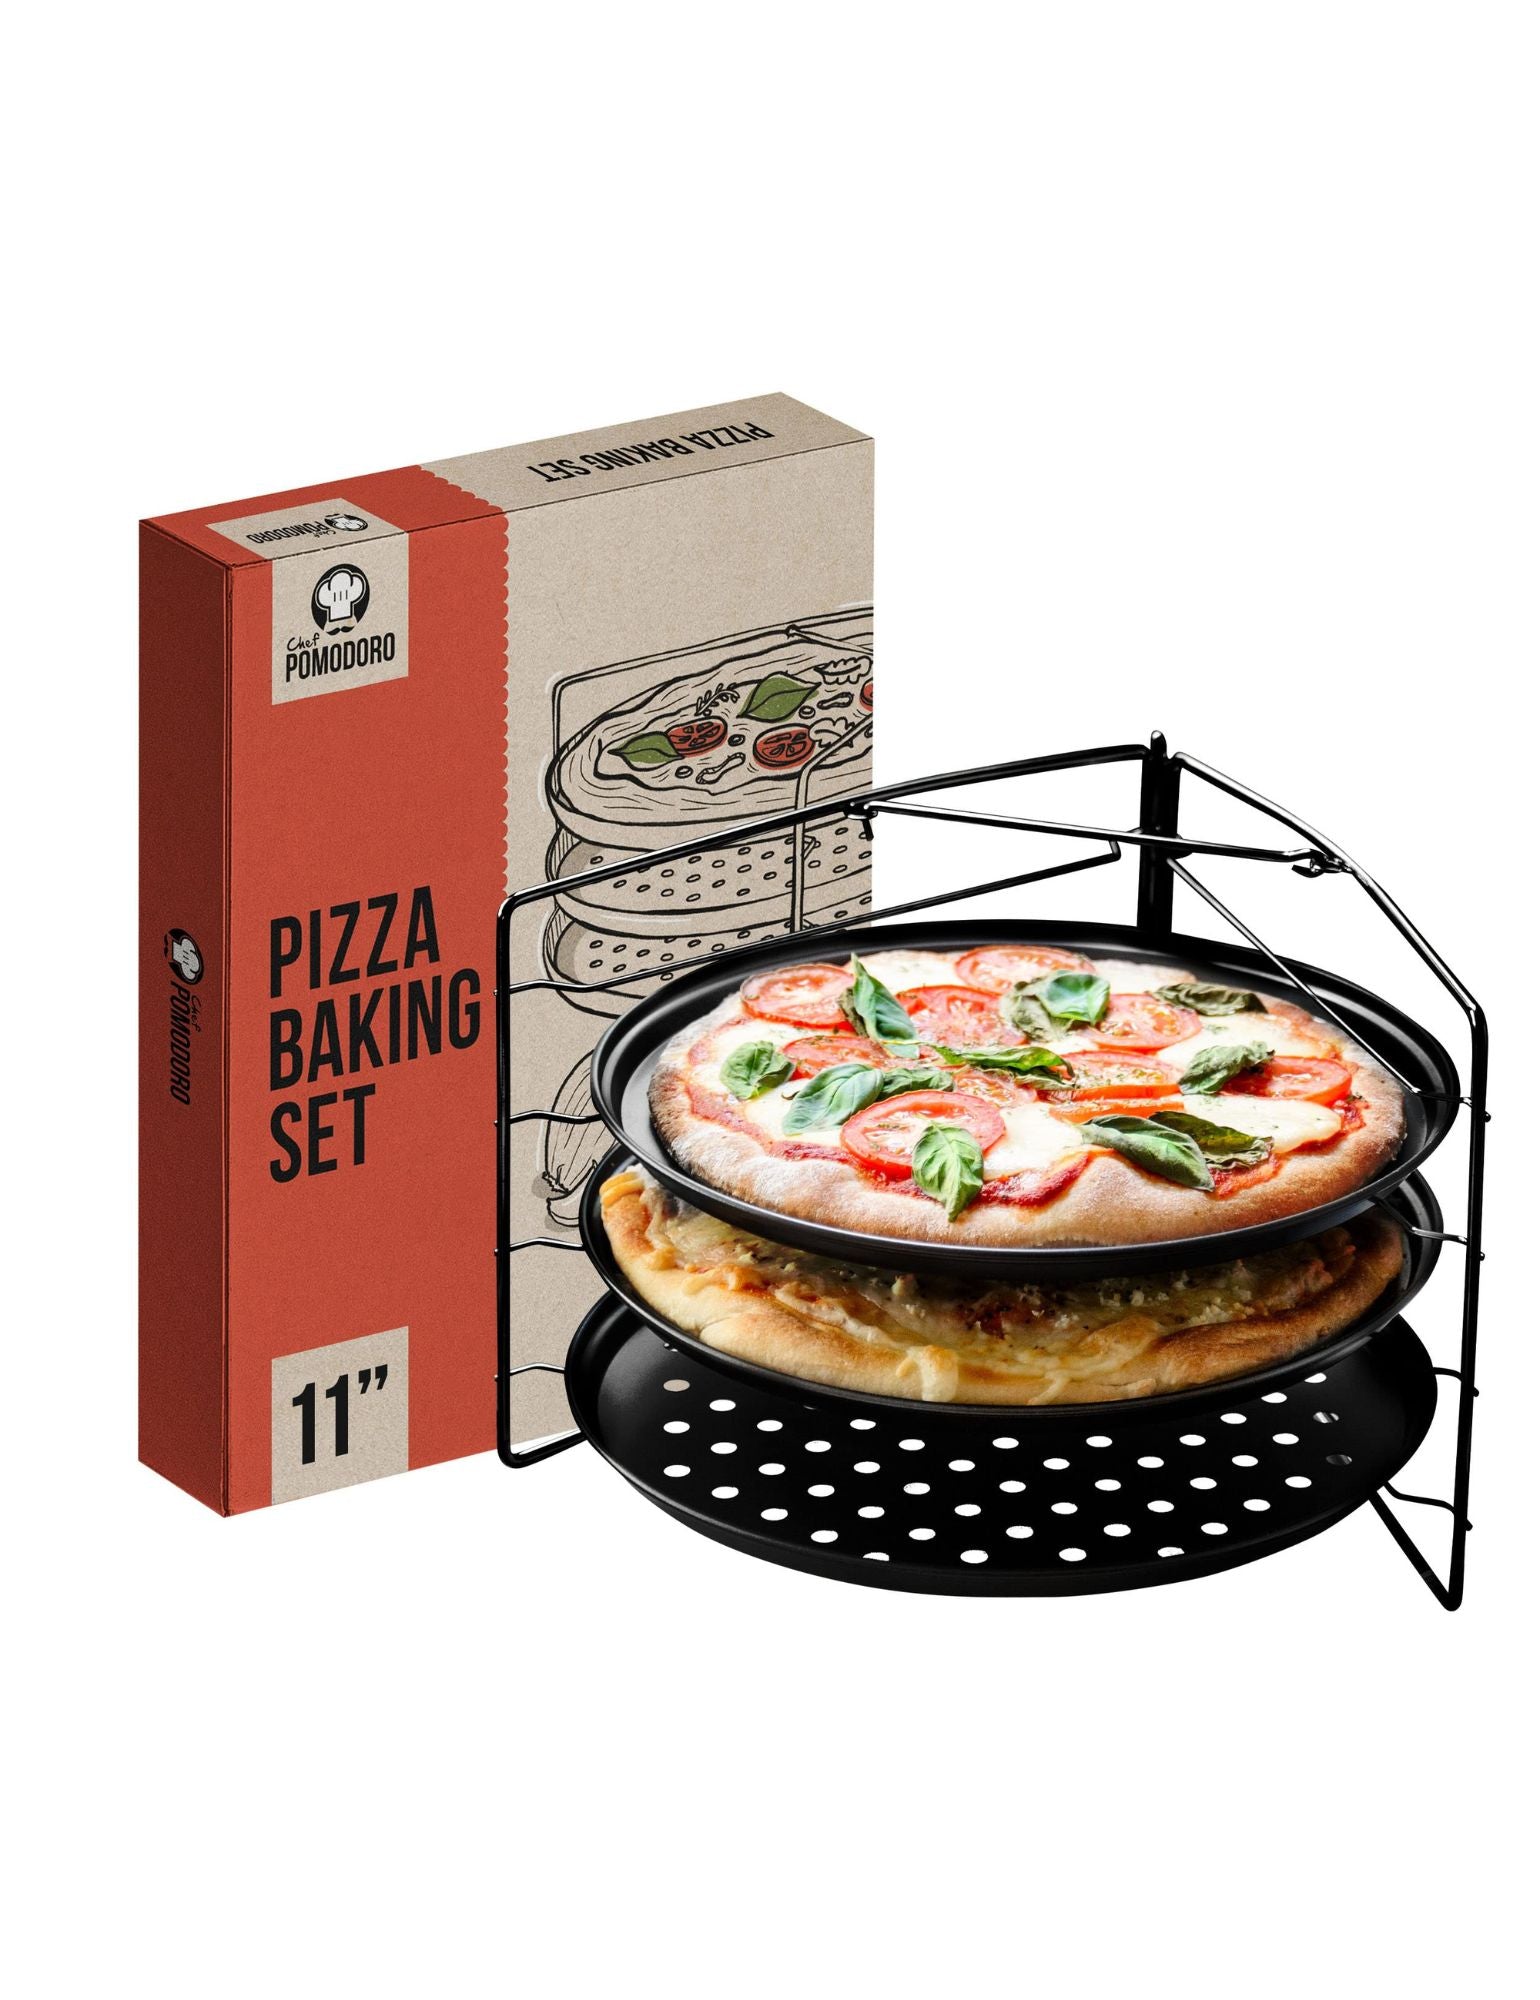 Non-stick Pizza Baking Set with 3 Pizza Pans (11-Inch) and Pizza Rack